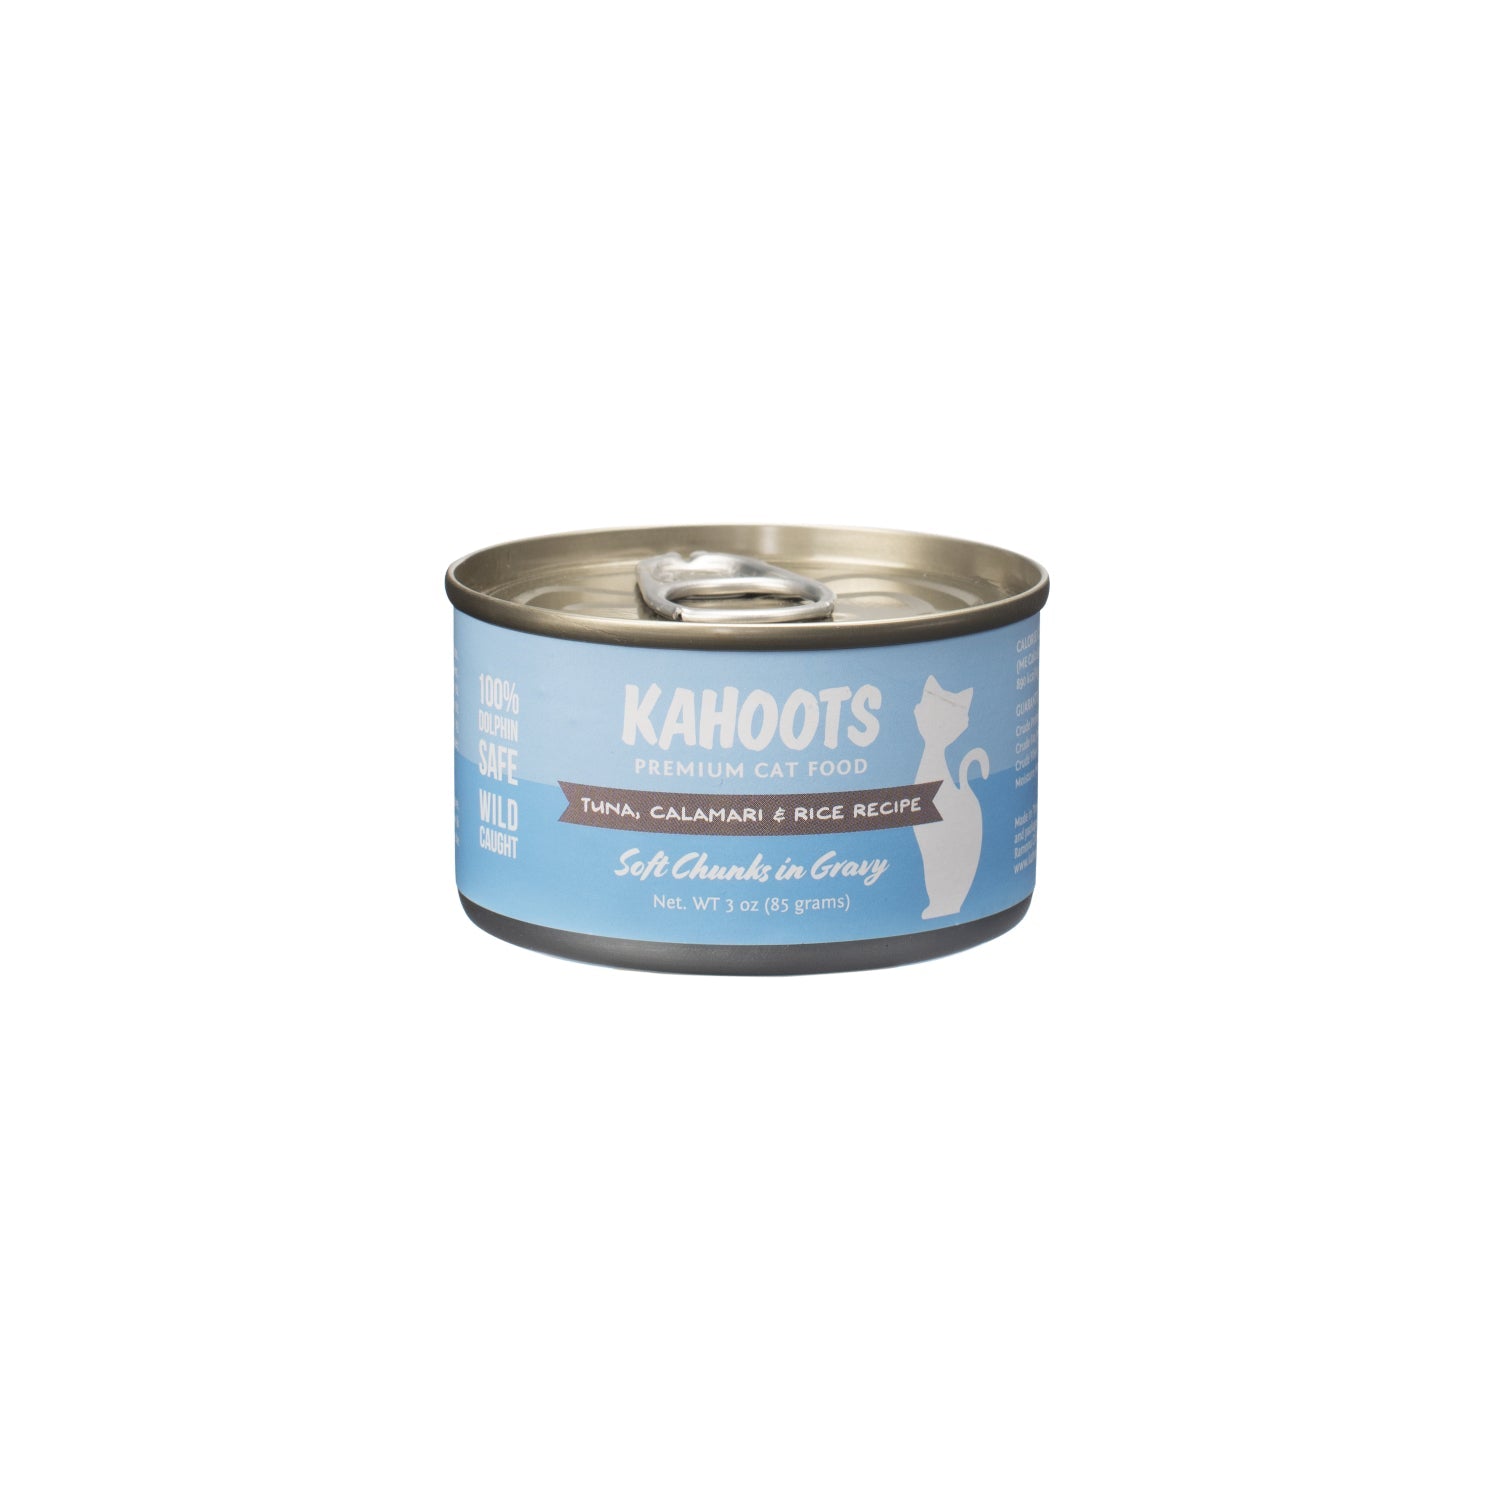 Tuna, Calamari, and rice wet cat food. Picture of a white cat over a blue background on label